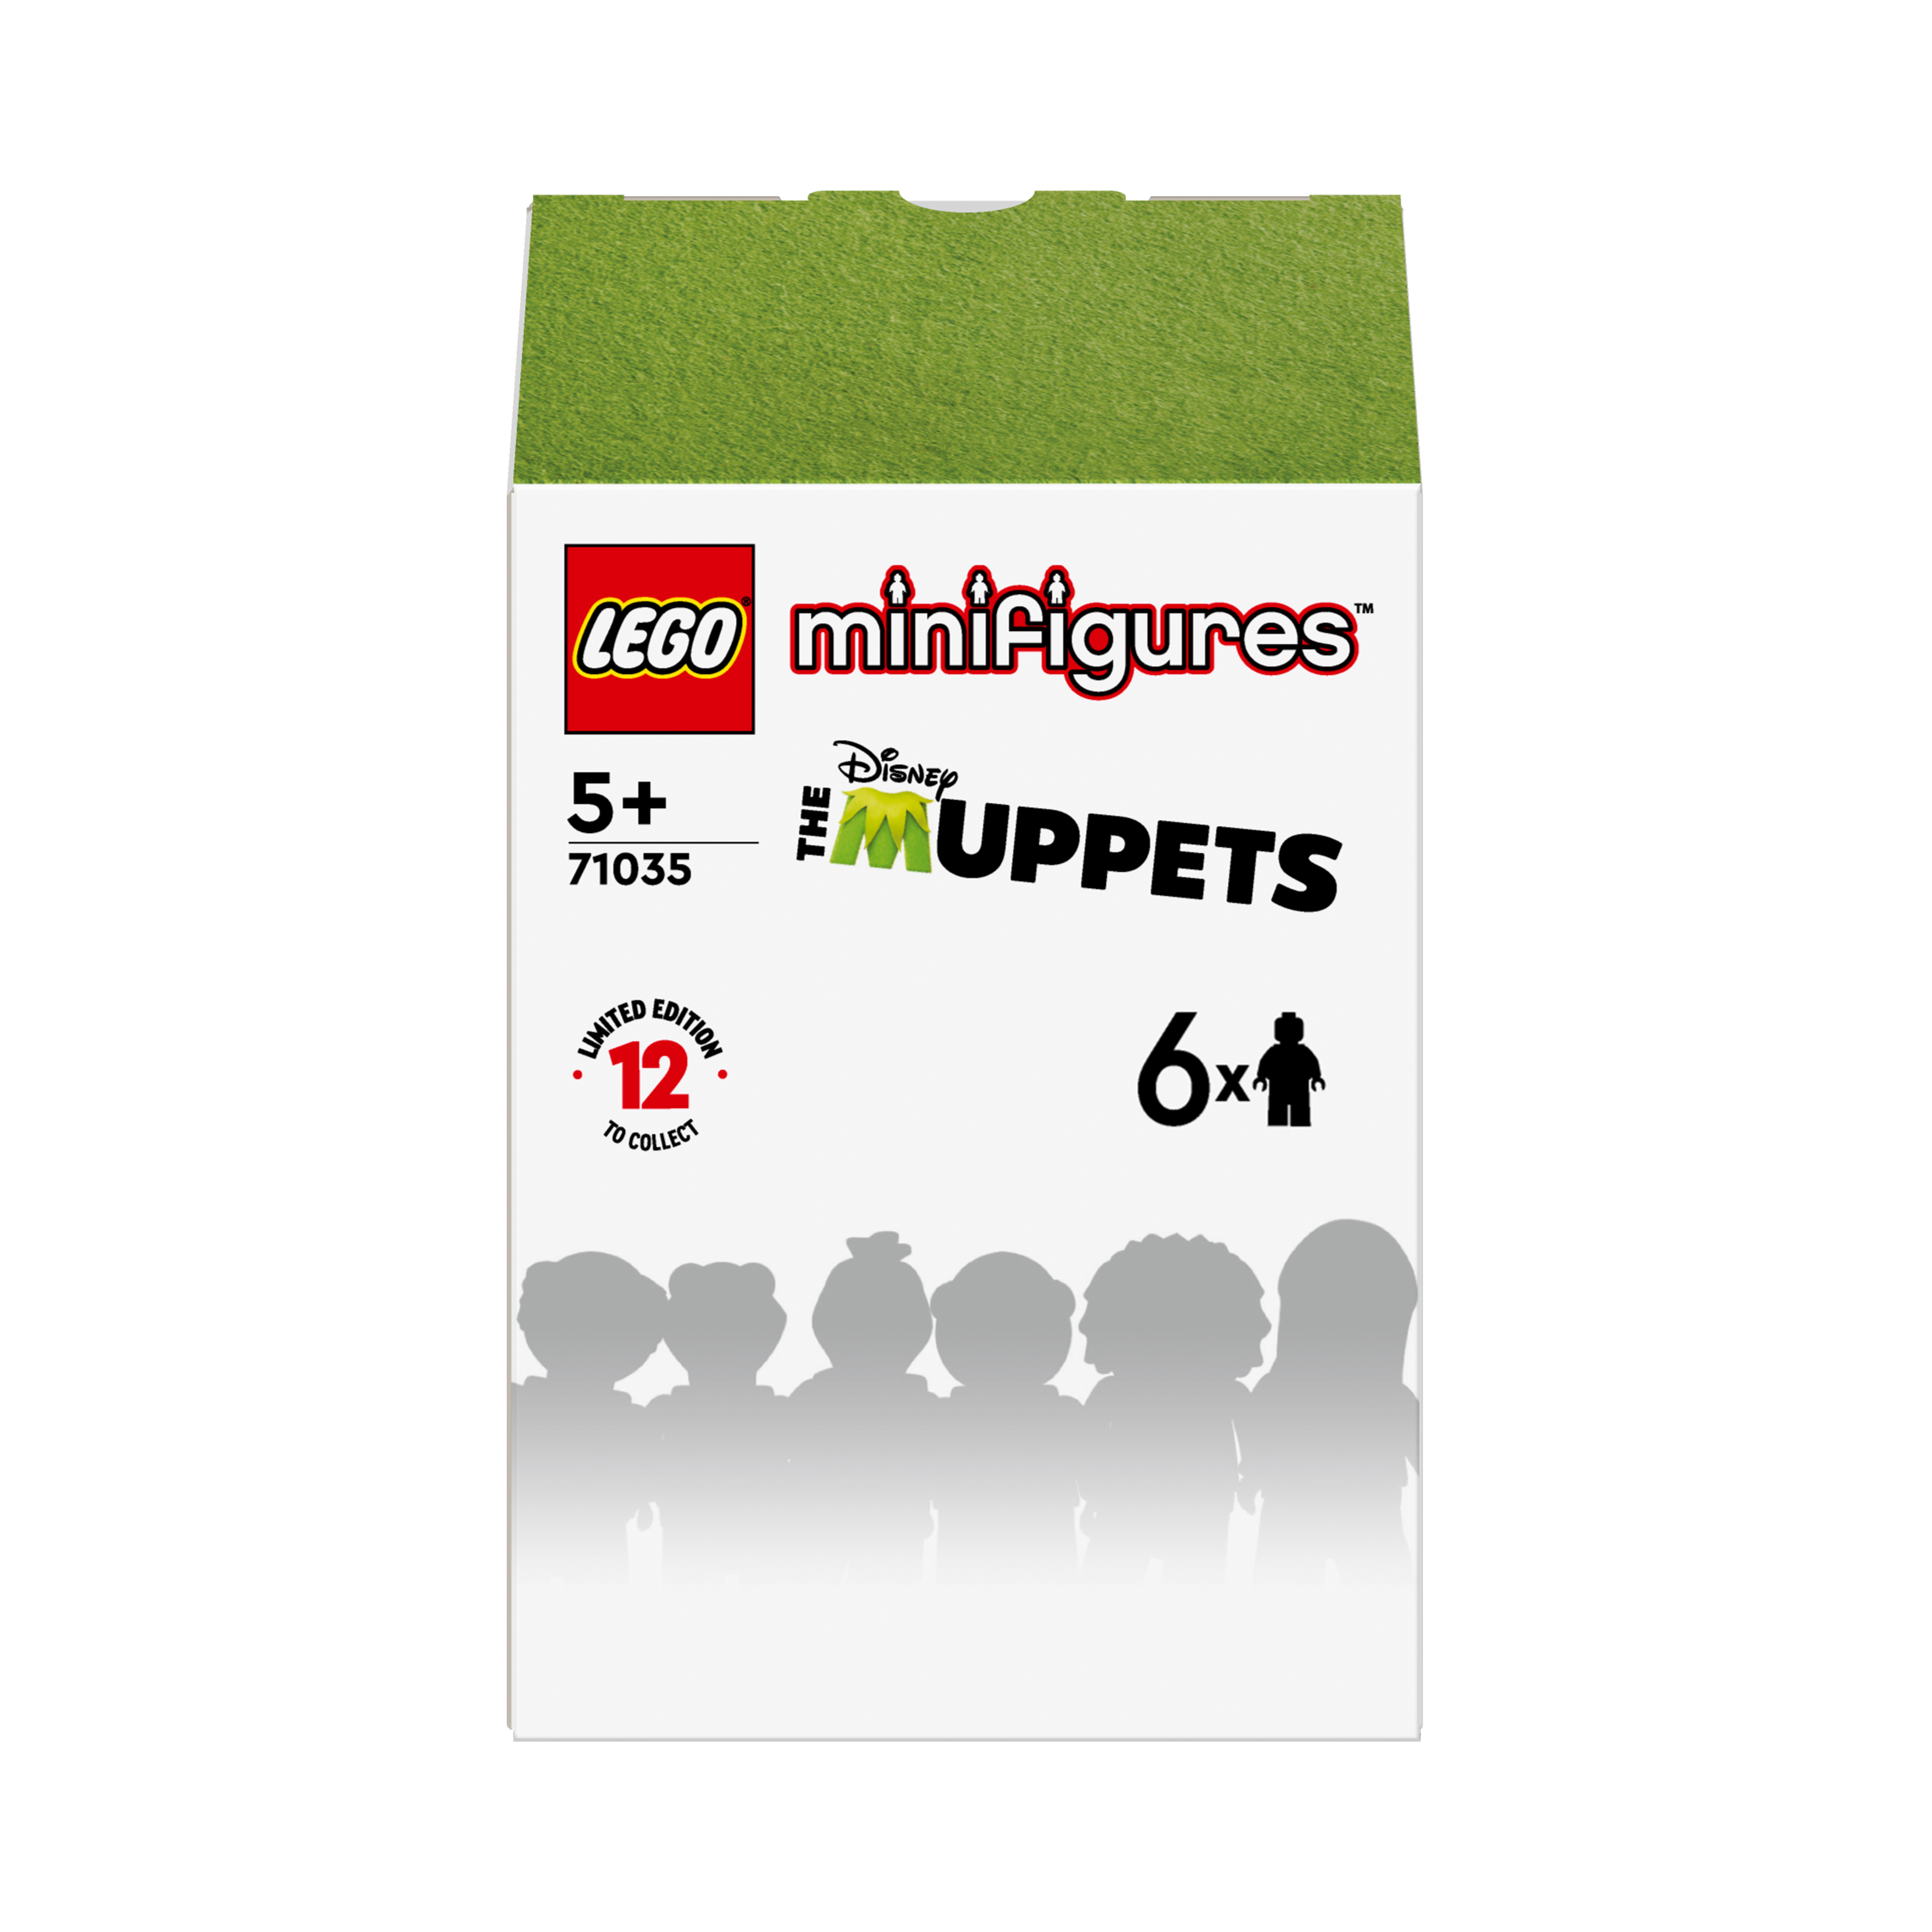 The Muppets 6 pack Minifigures